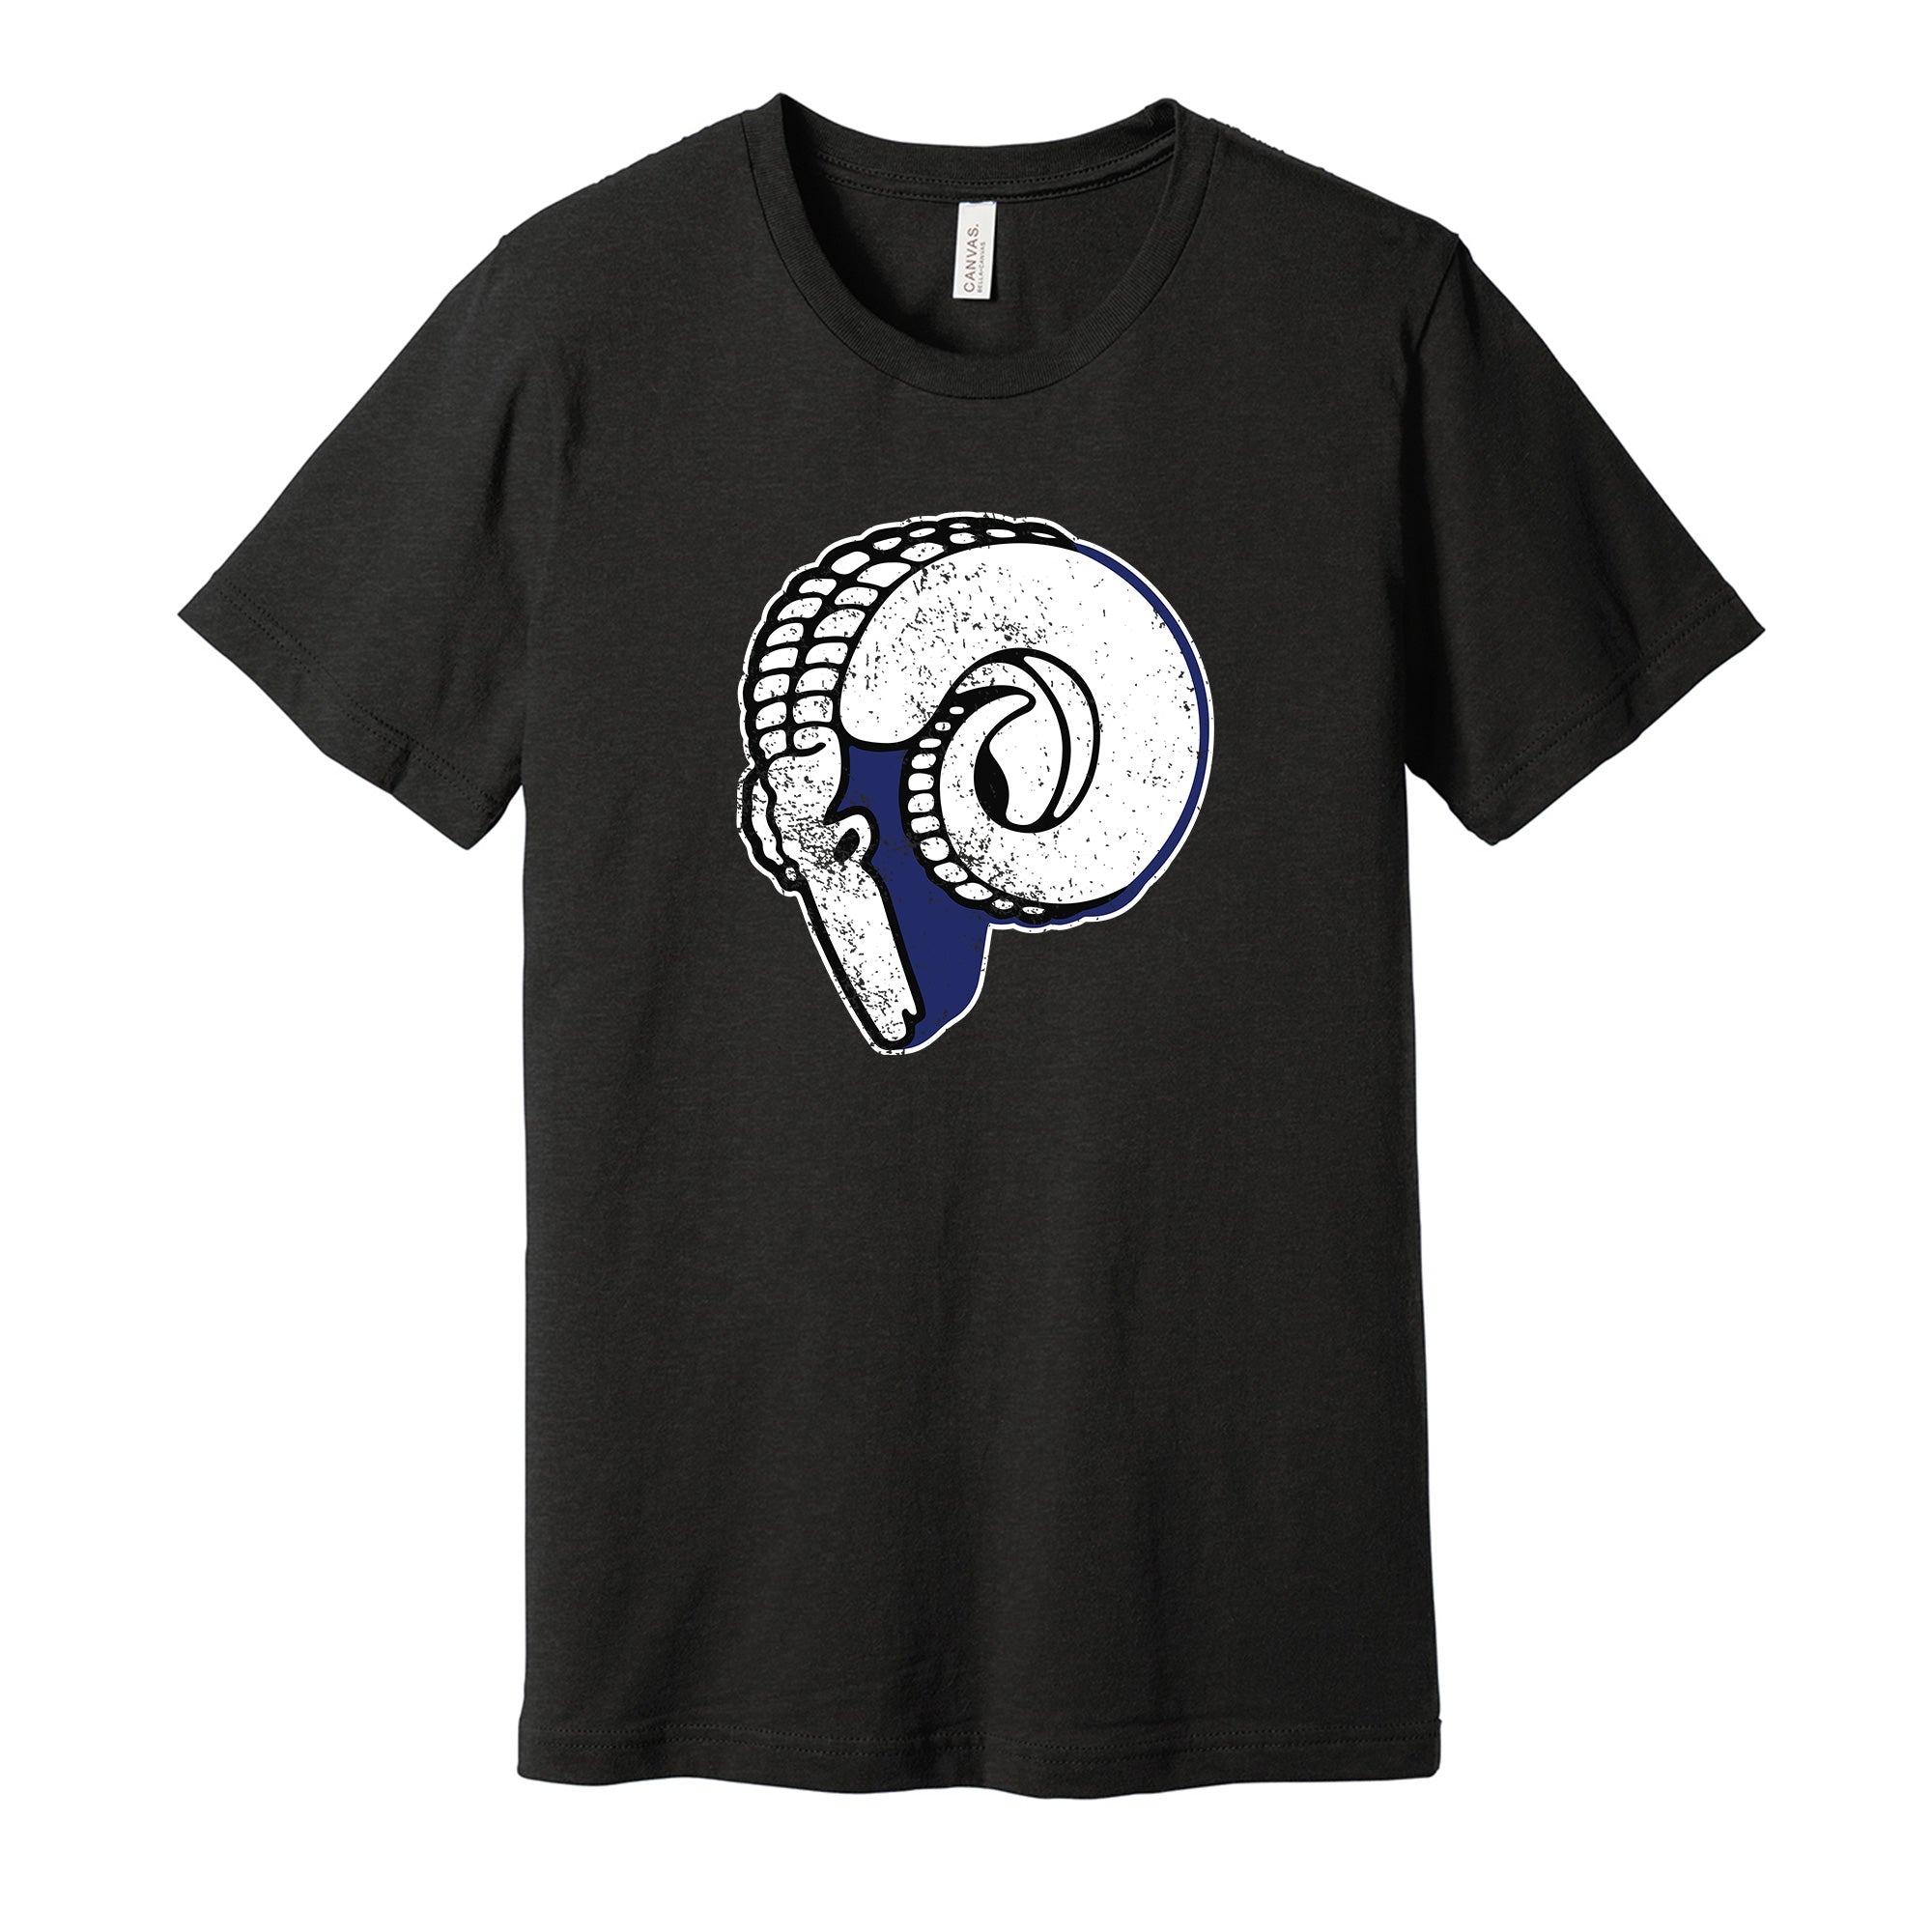 Cleveland Rams 1940s Distressed Logo - Defunct Ohio Sports Team Shirt - Celebrate Football Heritage and History - Hyper Than Hype Shirts M / Black